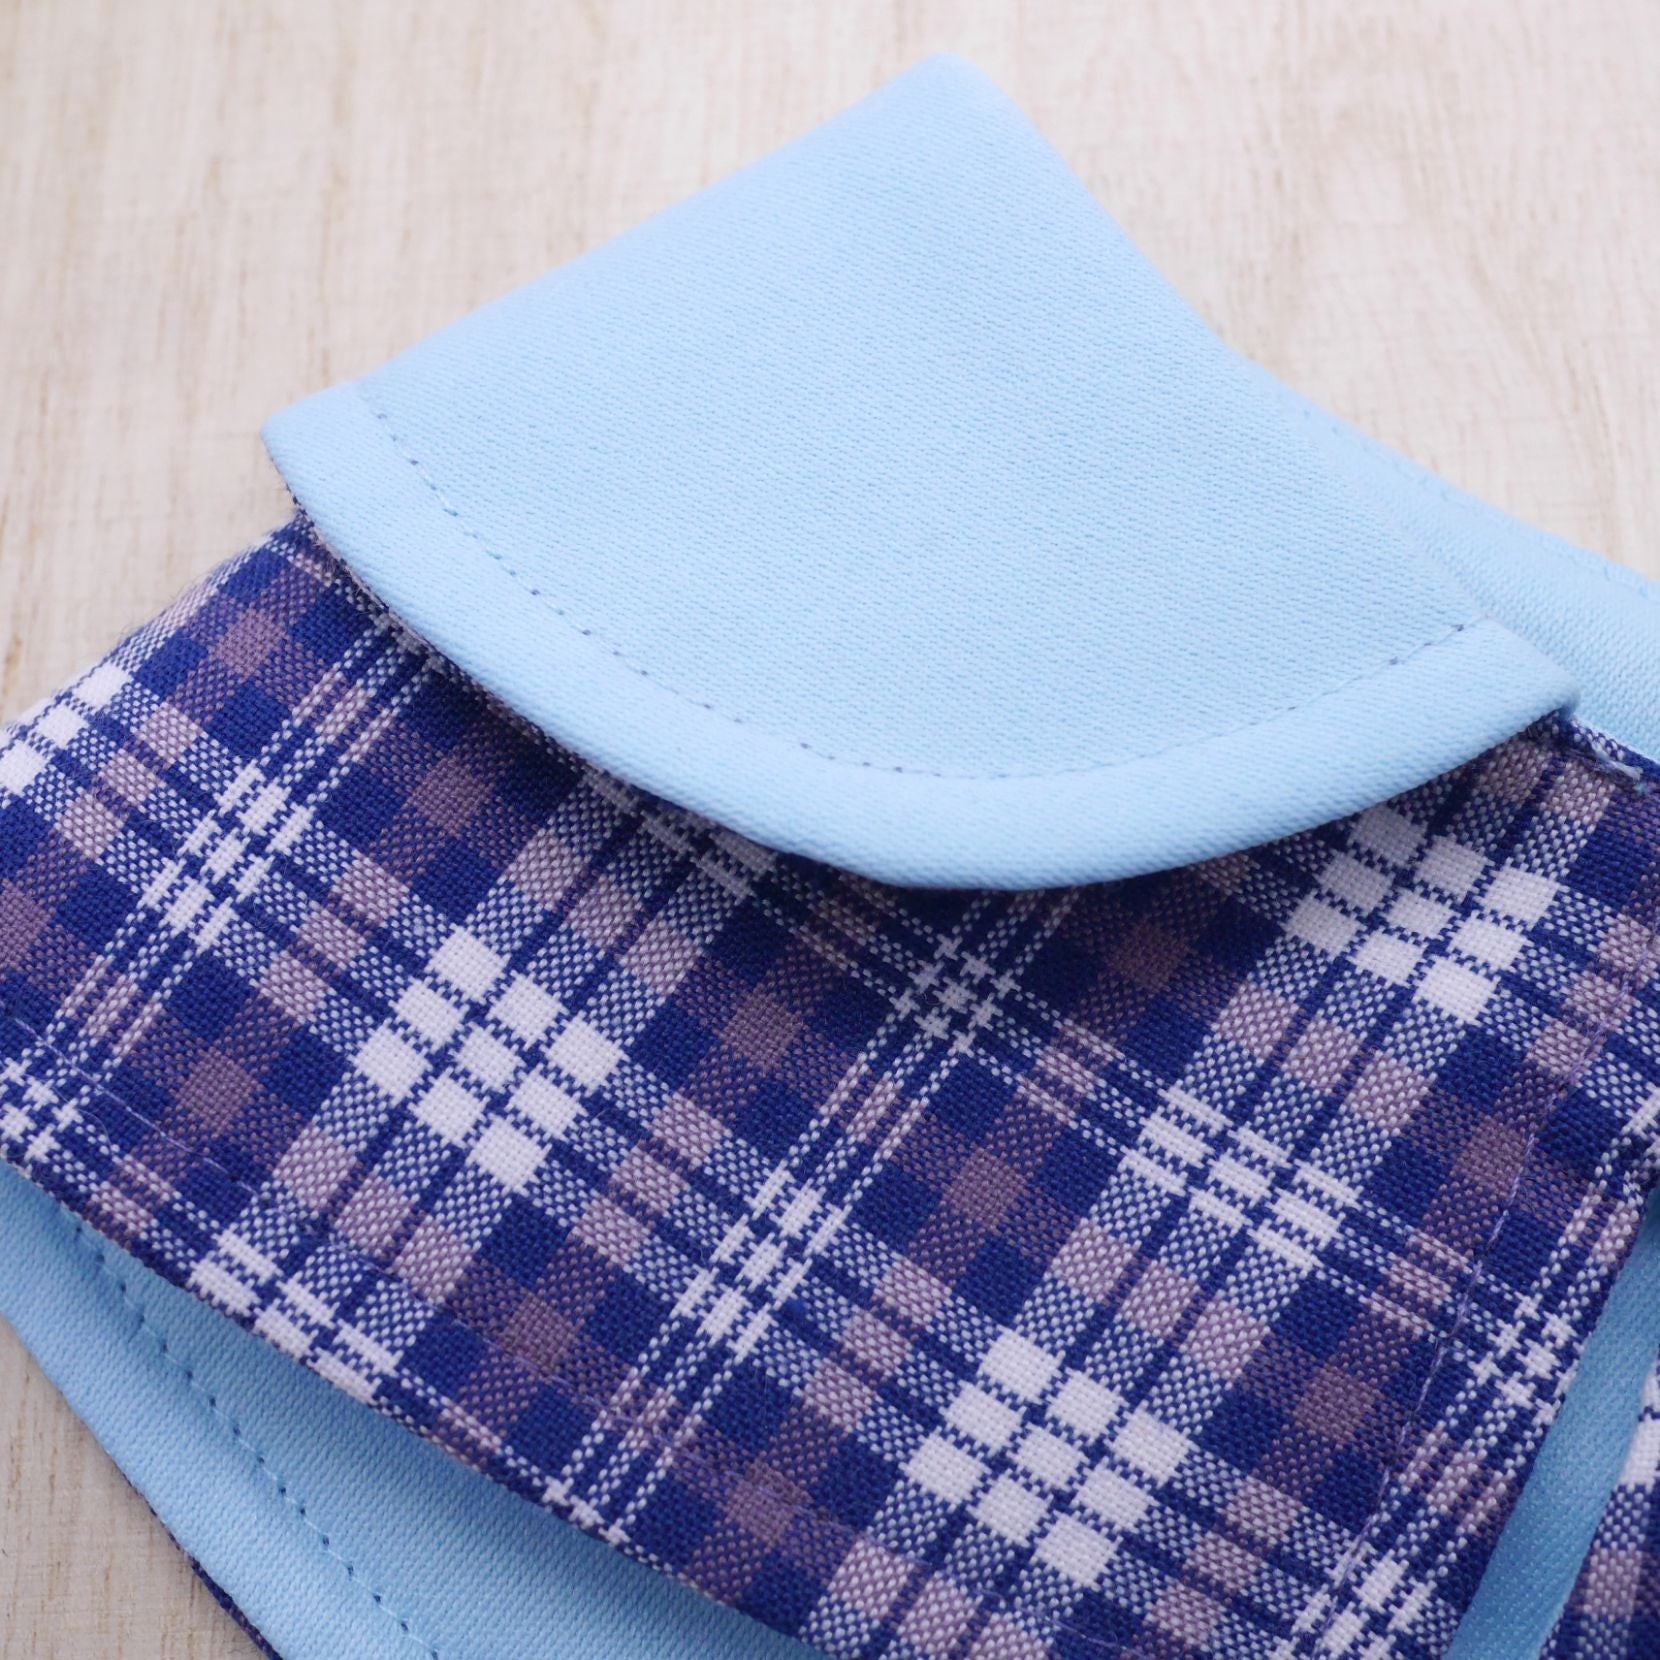 Capes - Baby Blue Collar with Tartan Print (Variant 2) - The Pet's Couture